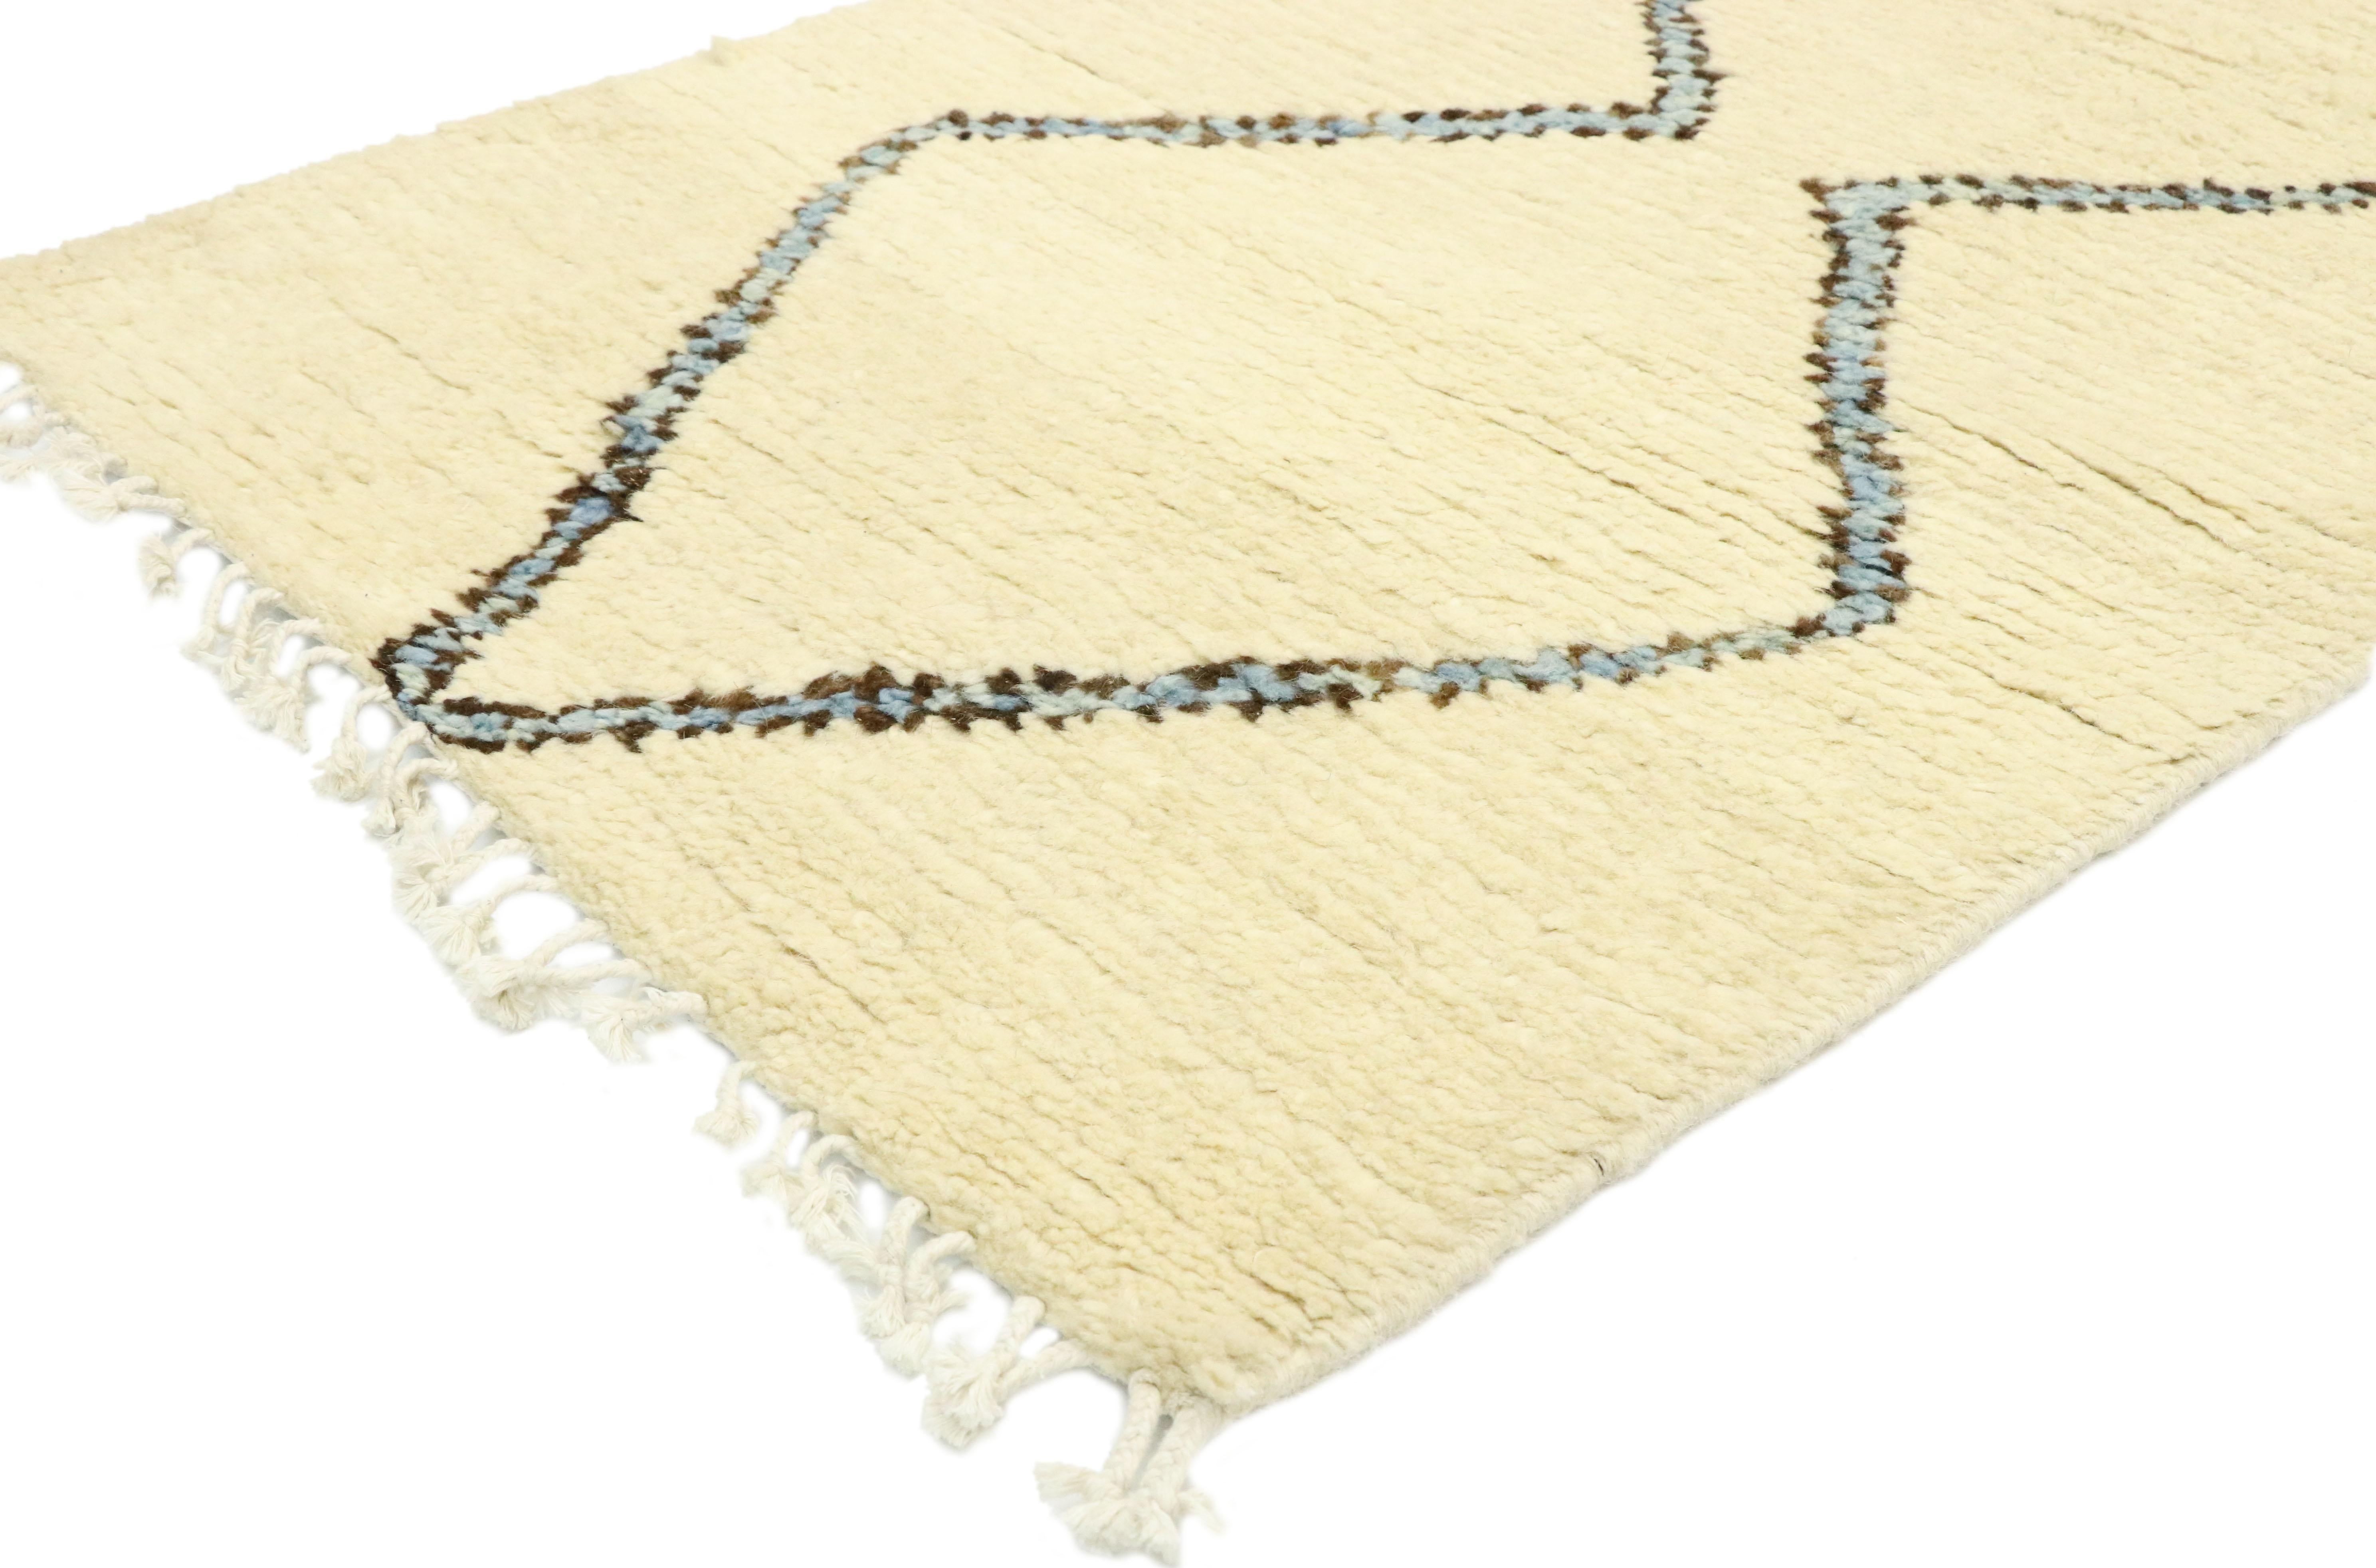 80612, new contemporary Moroccan Shag Hallway runner with Minimalist style. Softer yet no less striking, this hand knotted wool contemporary Moroccan runner embodies Minimalist style with hygge vibes. Simple zigzag lines come together forming